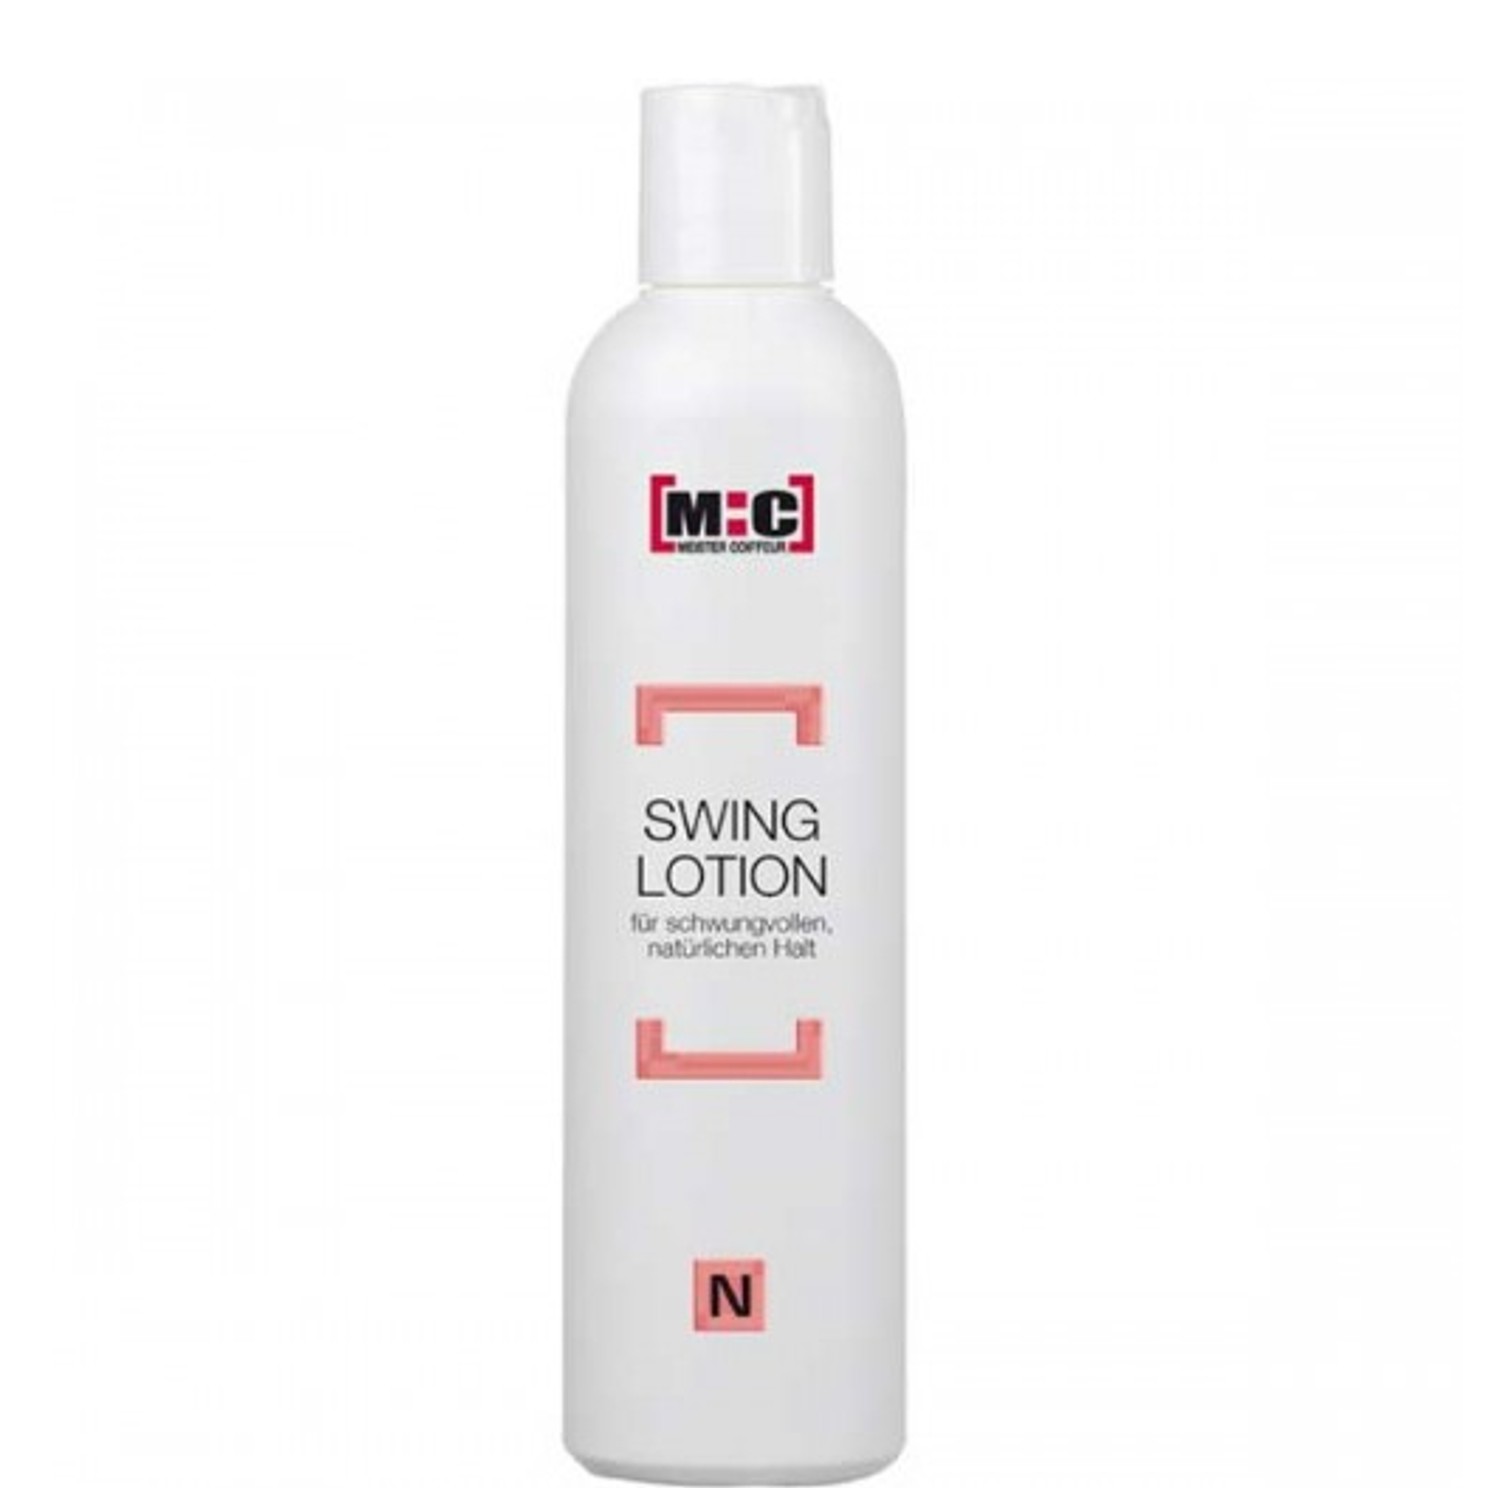 Meister Coiffeur M:C Swing Lotion N 250 ml